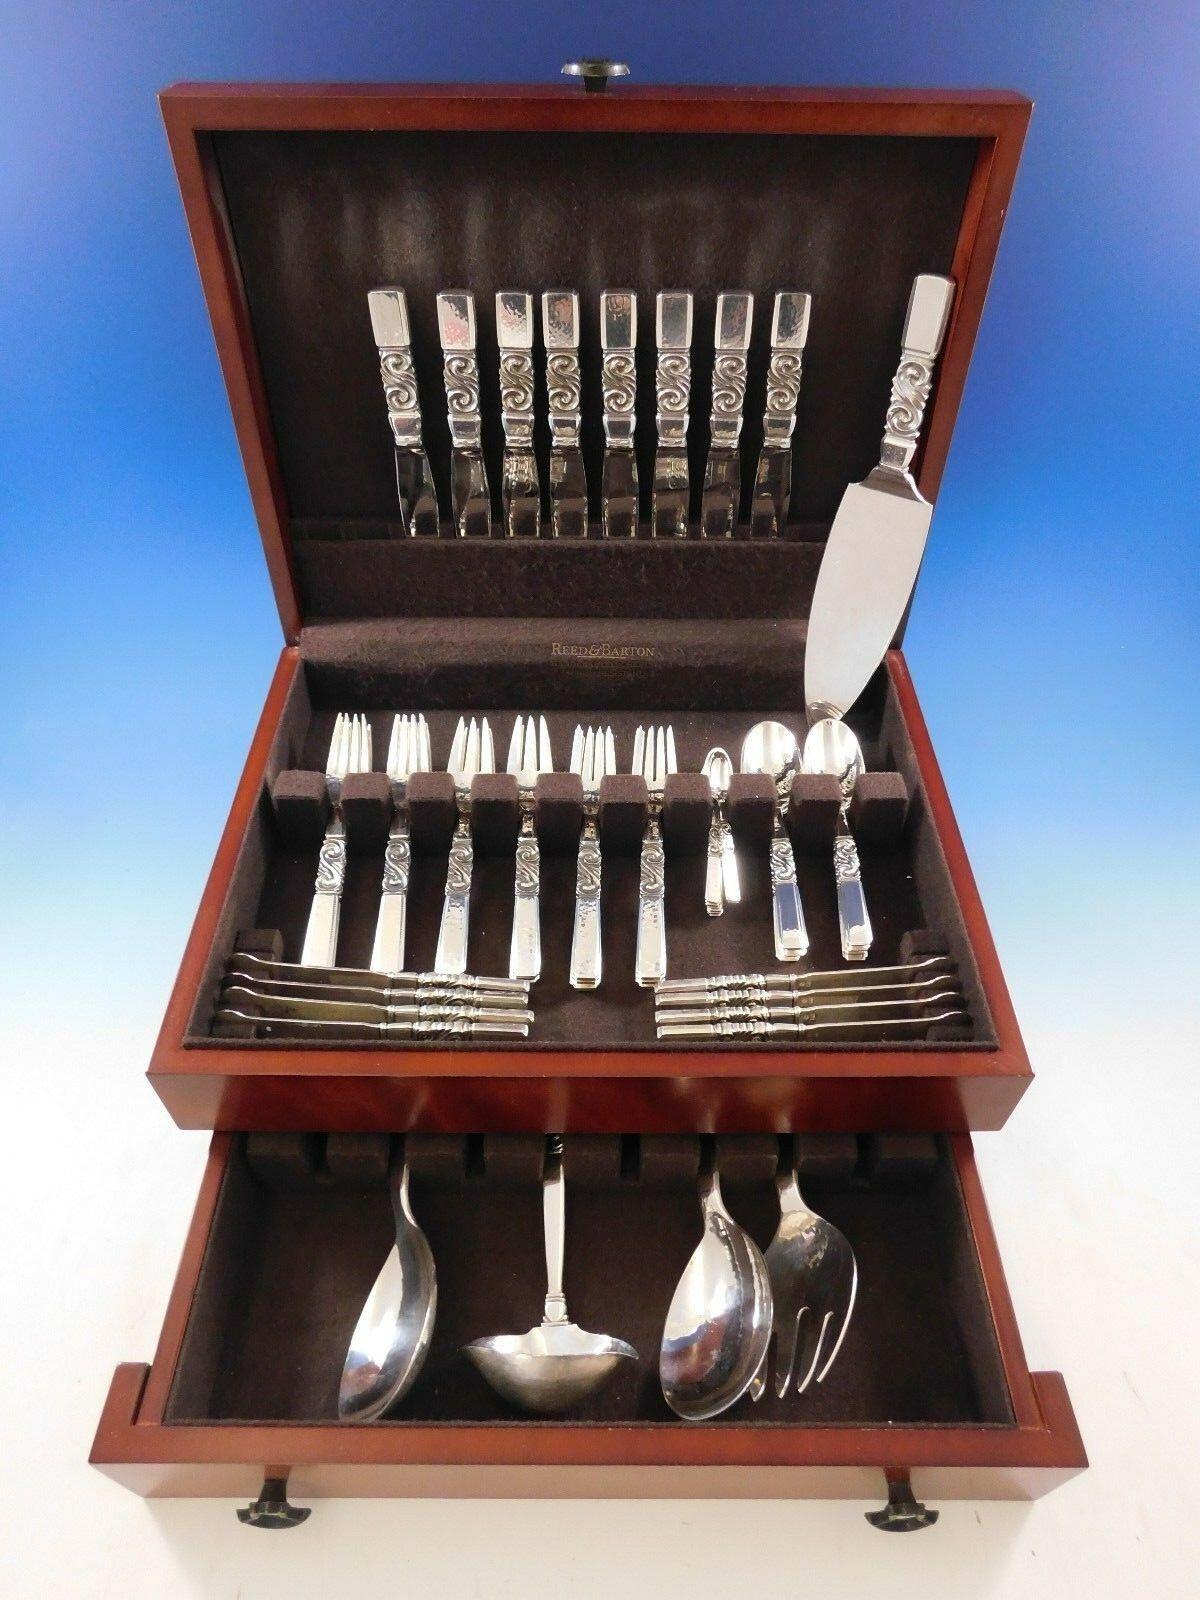 Beautiful Scroll by Georg Jensen Danish sterling silver flatware set - 61 Pieces. This set includes:

8 knives, 7 3/4